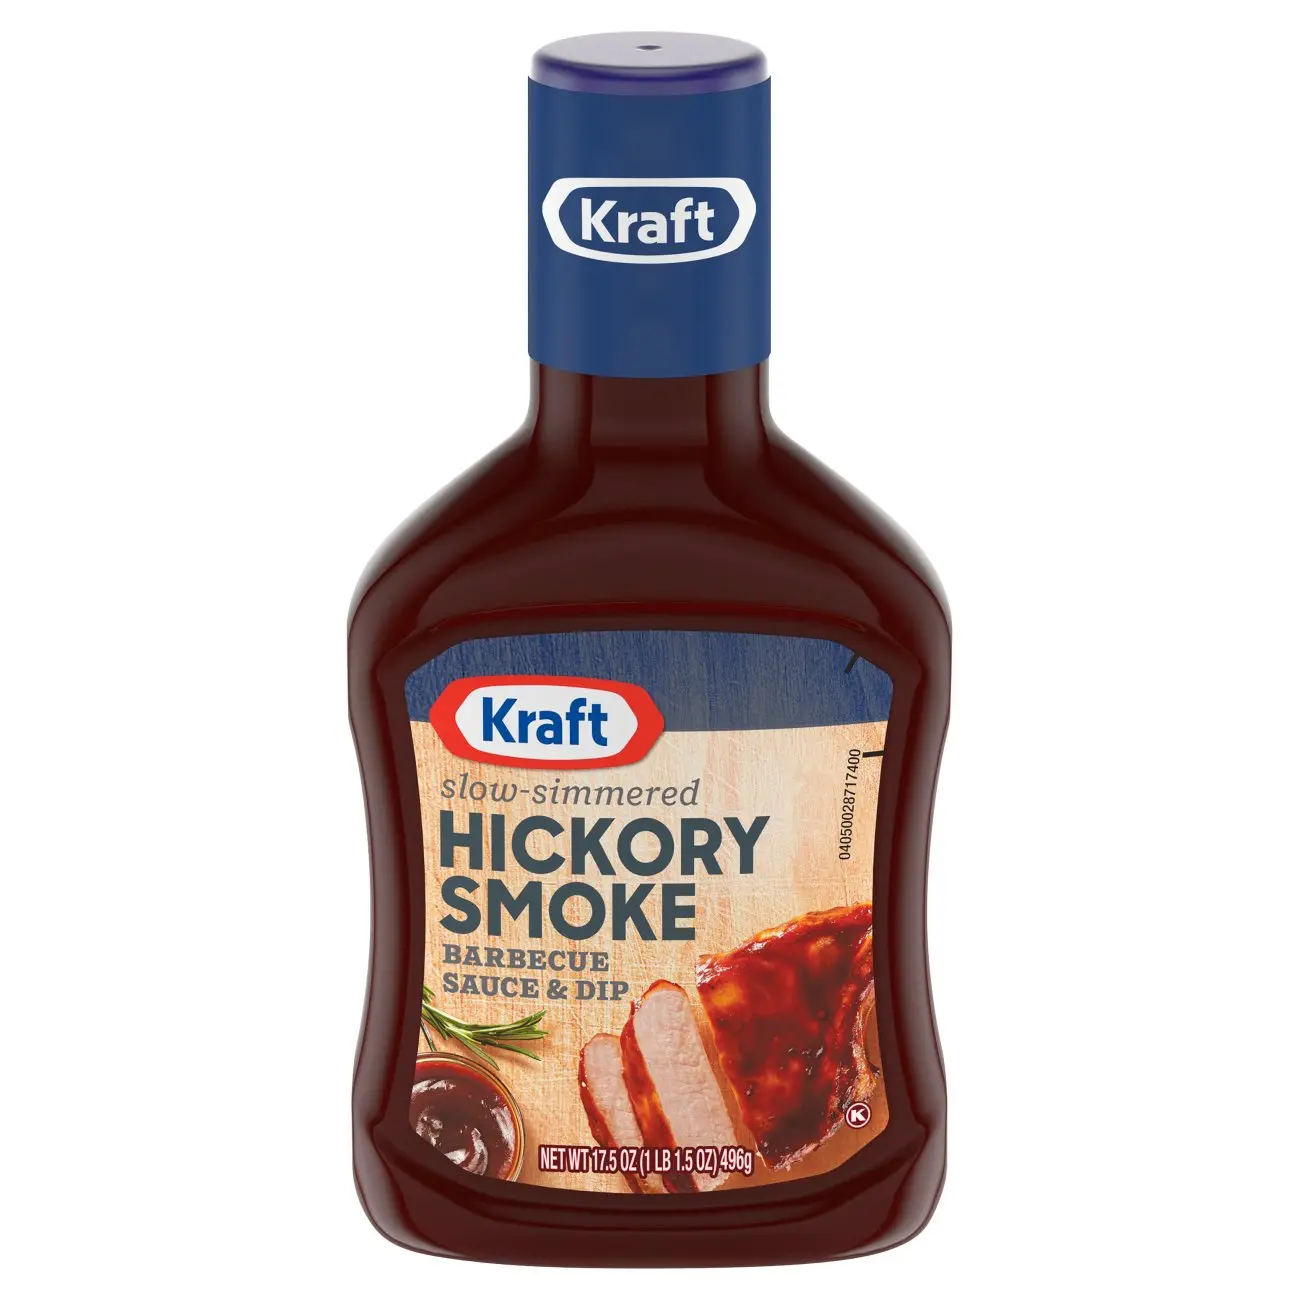 hickory smoked barbecue sauce - What is hickory BBQ sauce made of